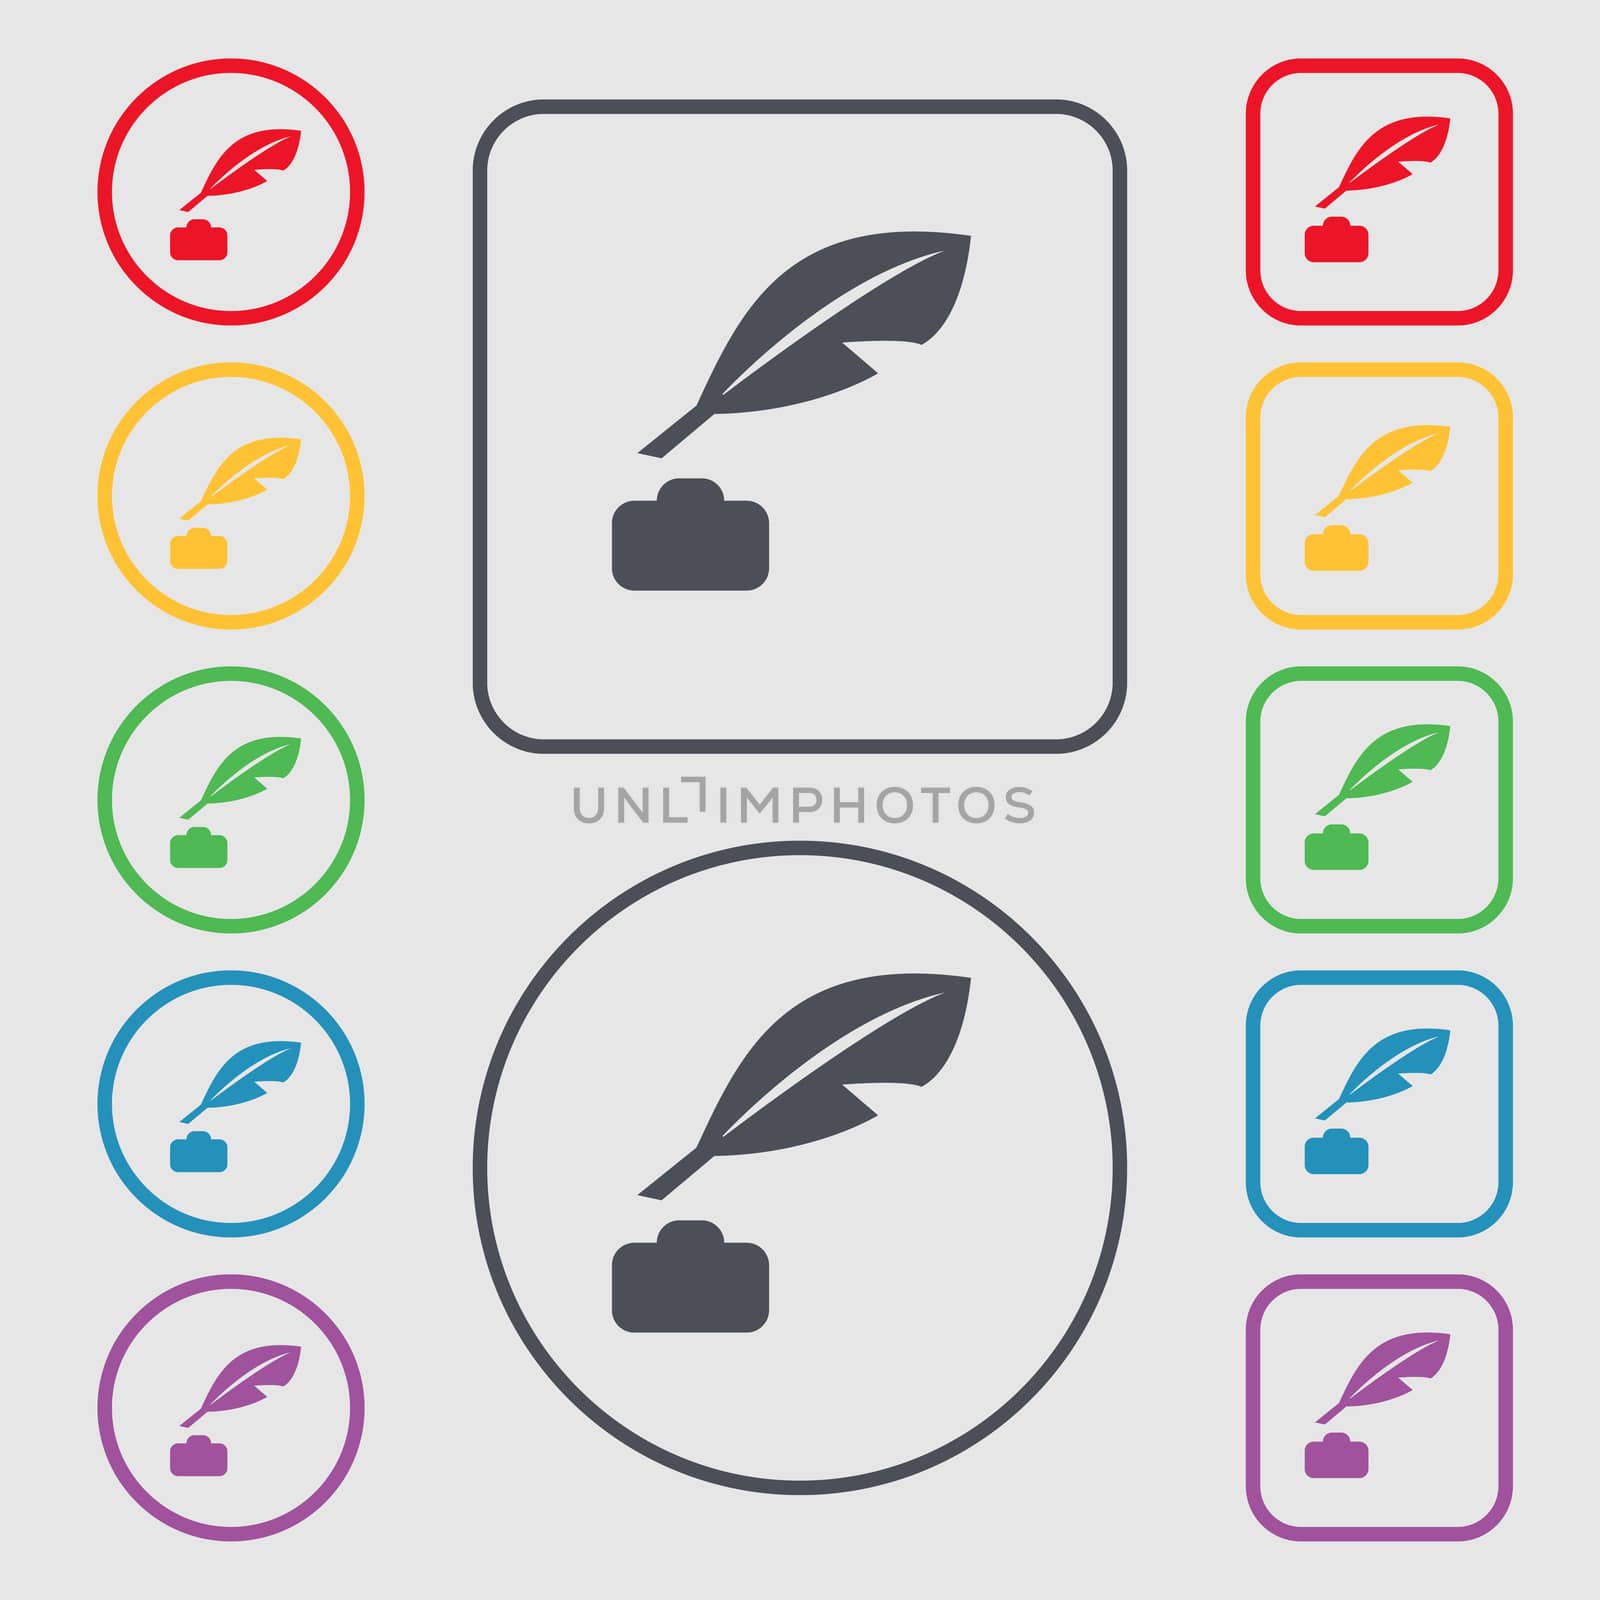 Feather, Retro pen icon sign. symbol on the Round and square buttons with frame. illustration